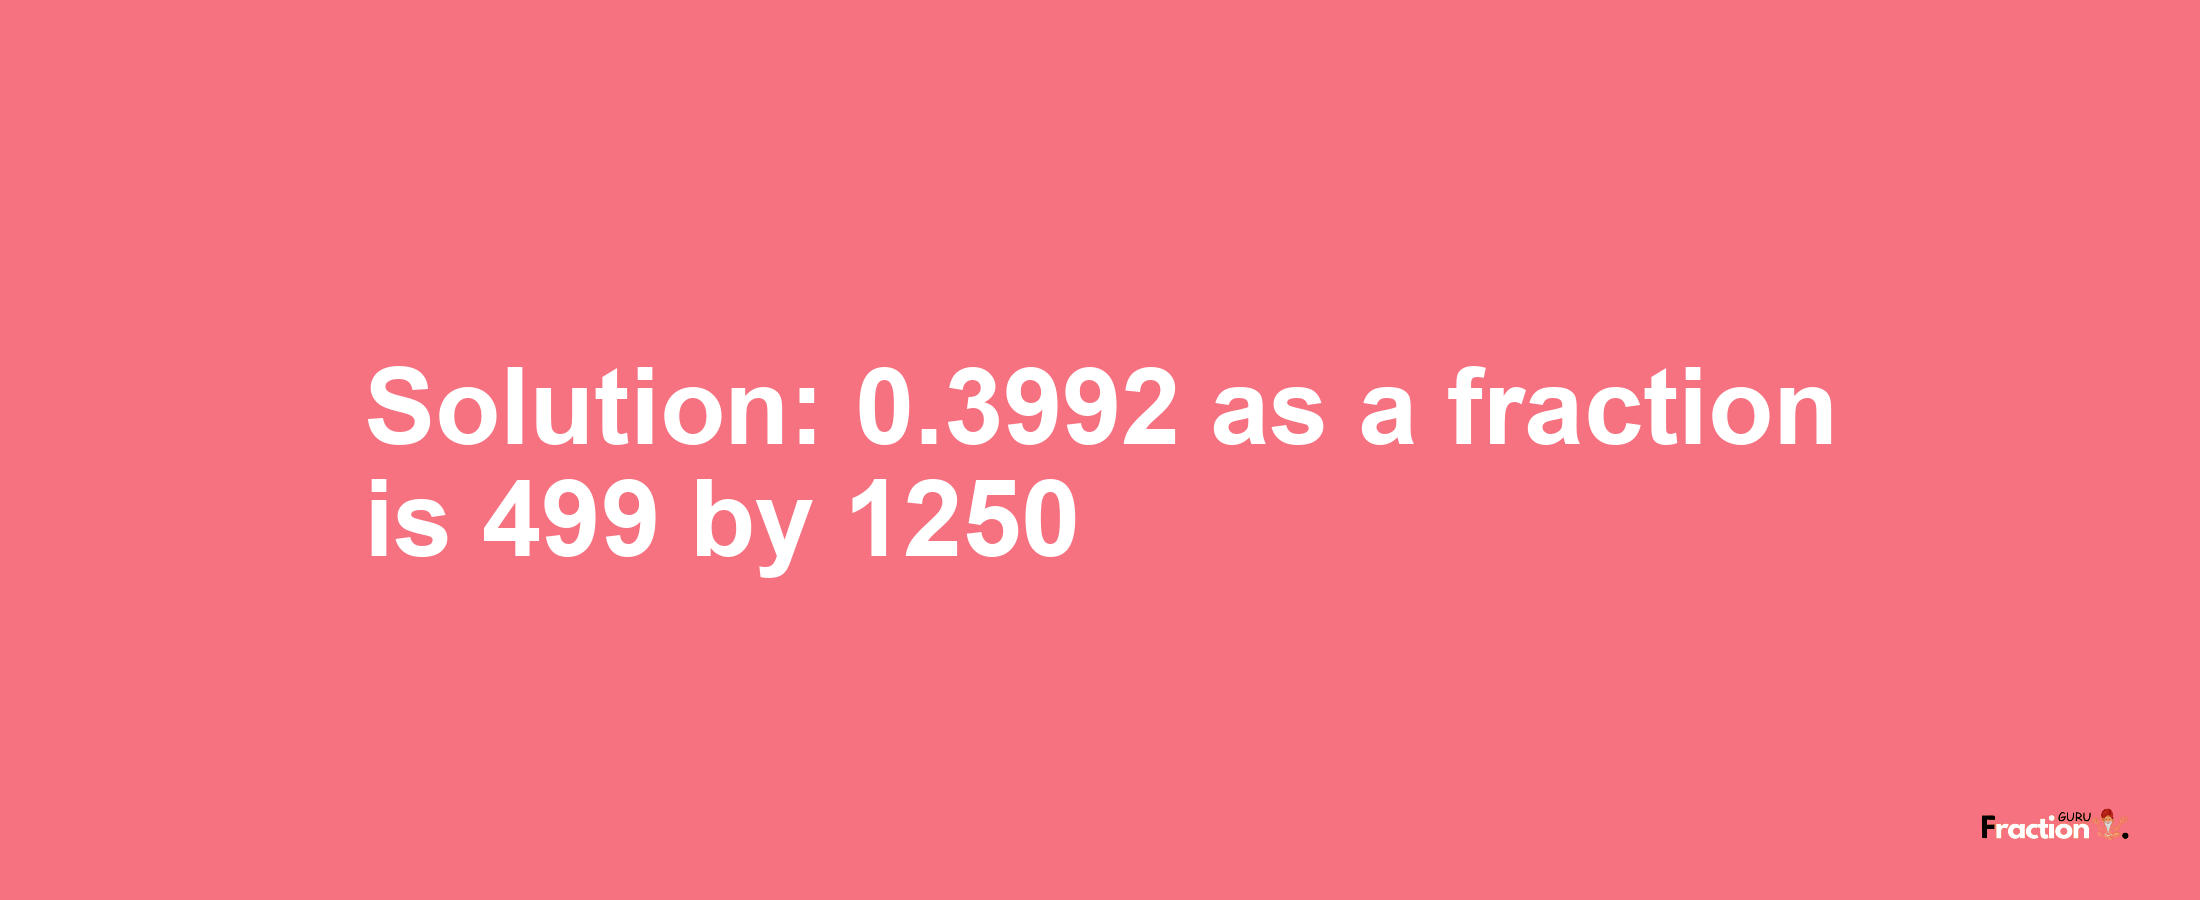 Solution:0.3992 as a fraction is 499/1250